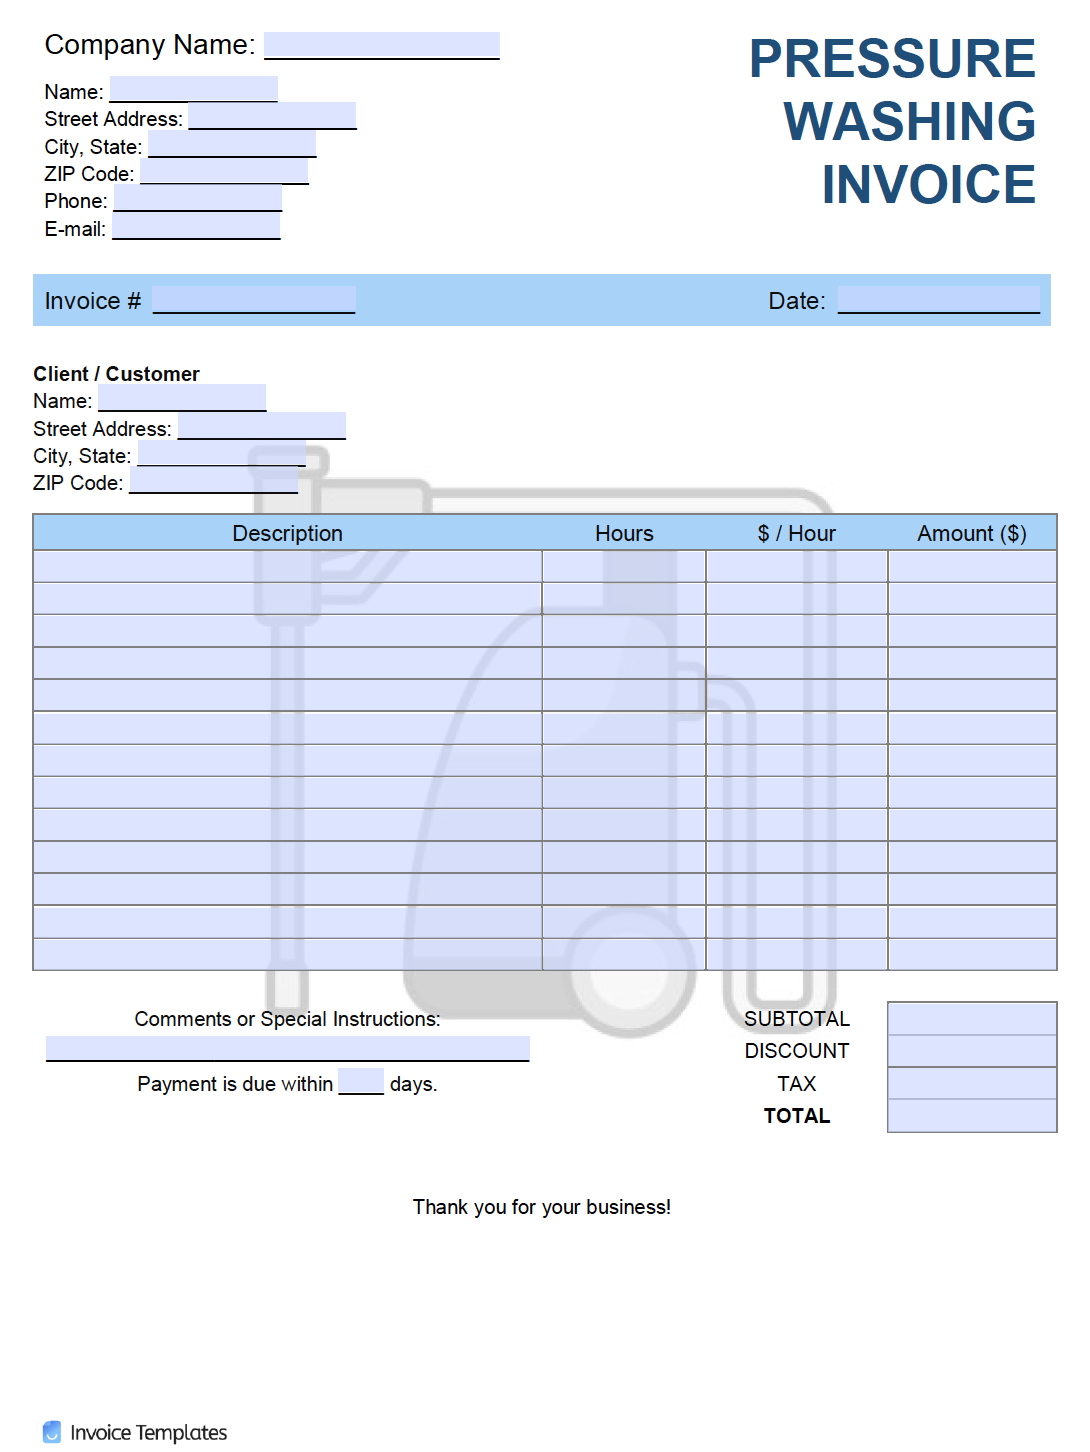 Free Pressure Washing Invoice Template PDF WORD EXCEL